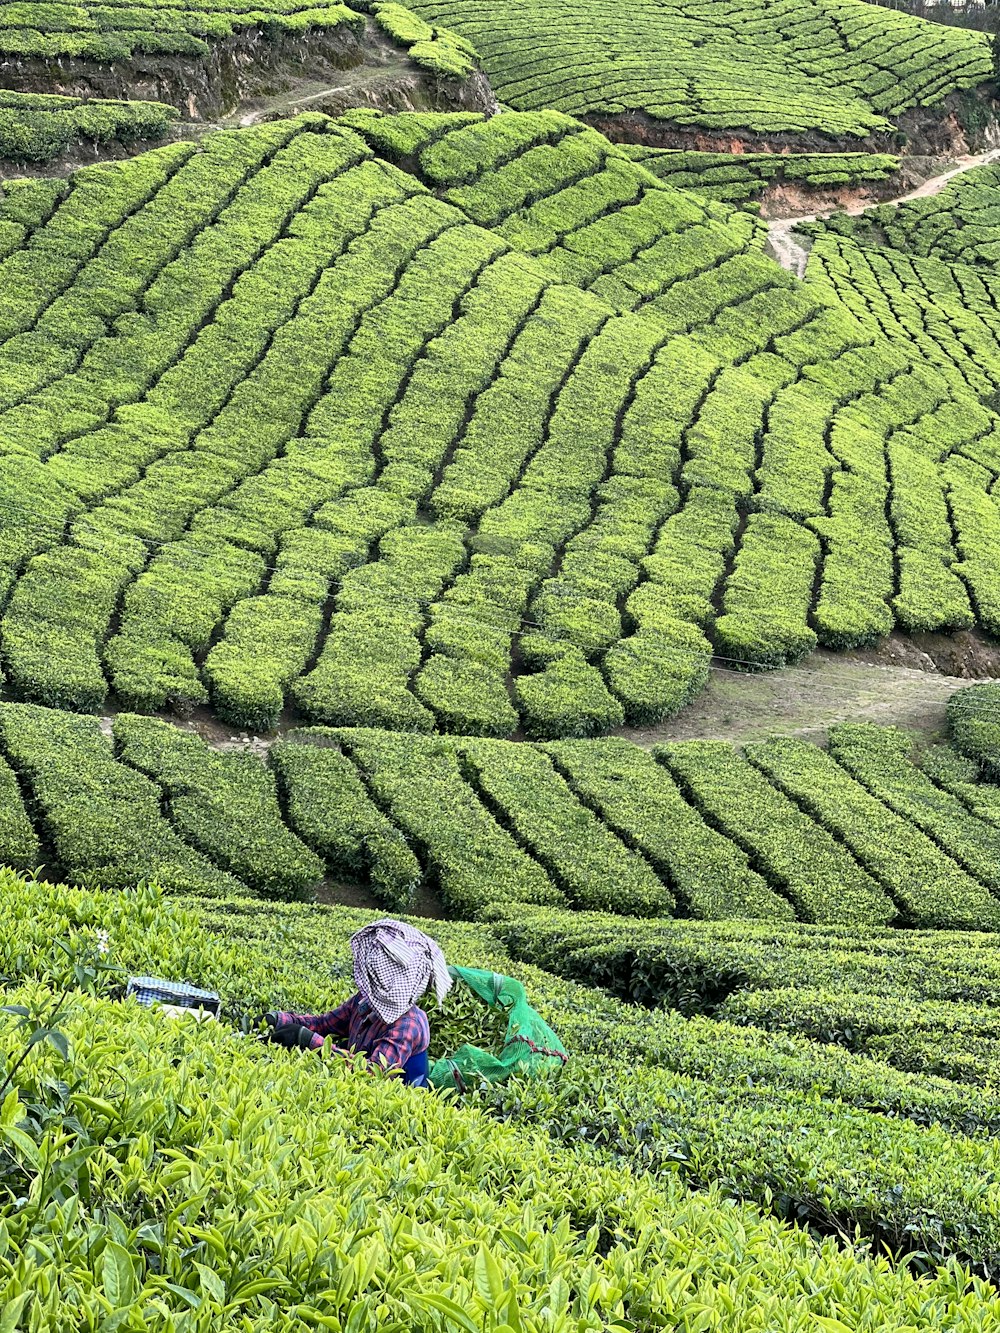 a person with a backpack in a field of tea bushes